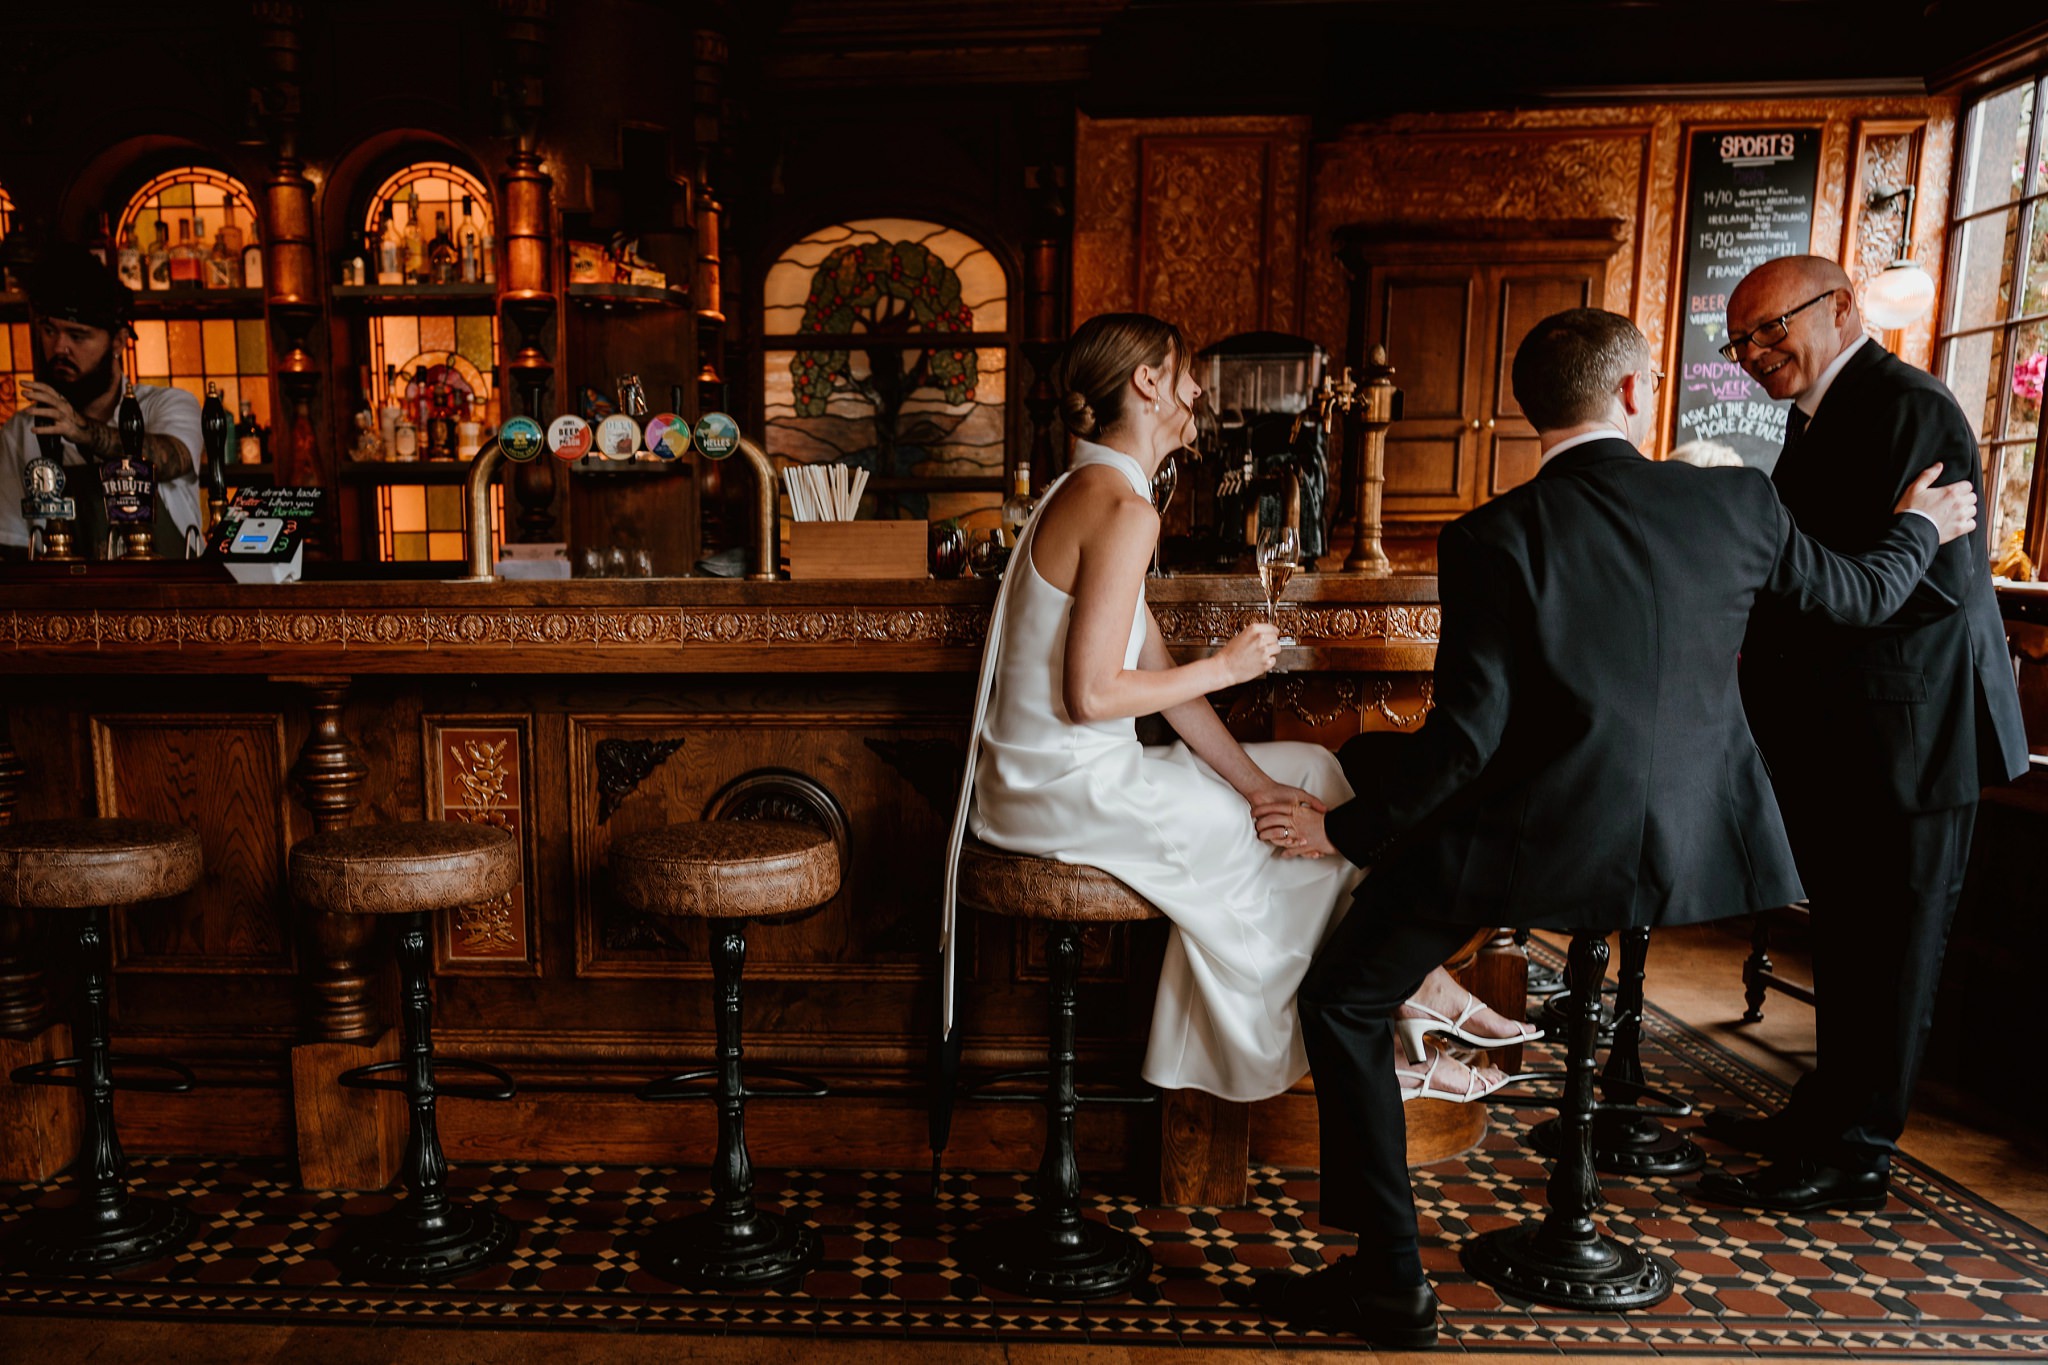 Meet new friends - Quiet moment for quick drink - Chelsea Town Hall Wedding Photography